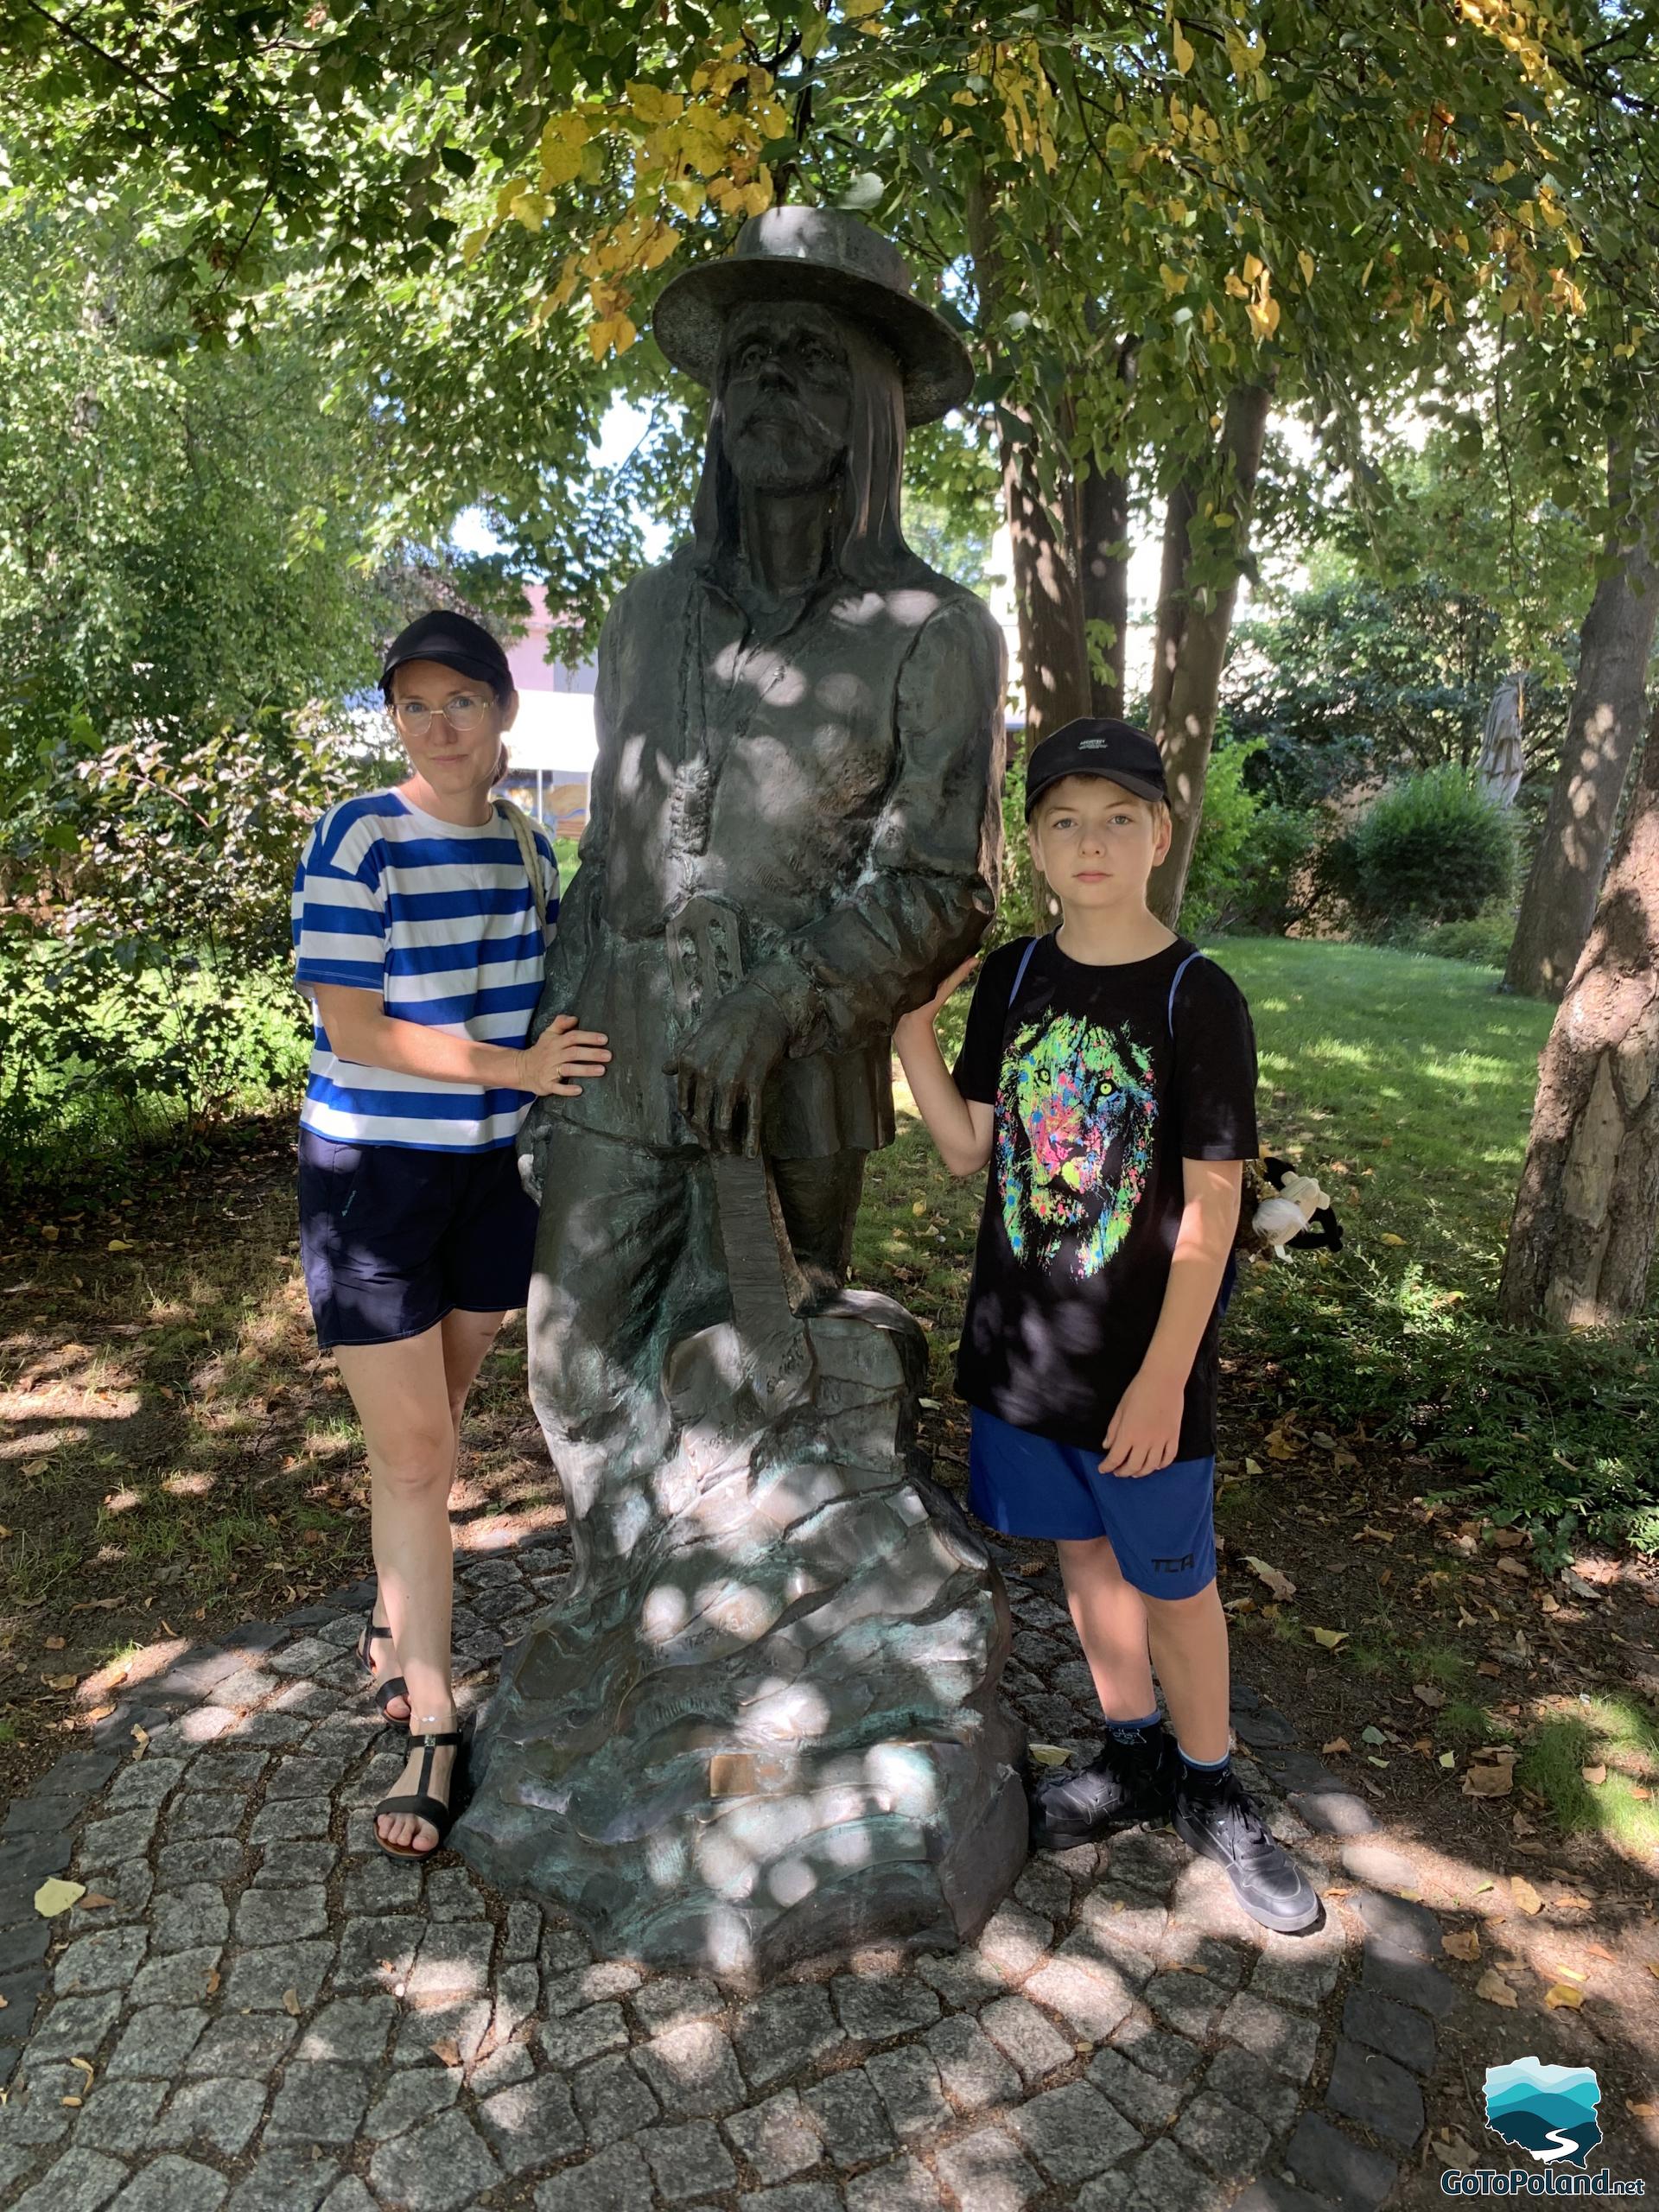 a sculpture of a famous Polish singer located in the shade of a tree, a woman and a boy are standing next to the sculpture